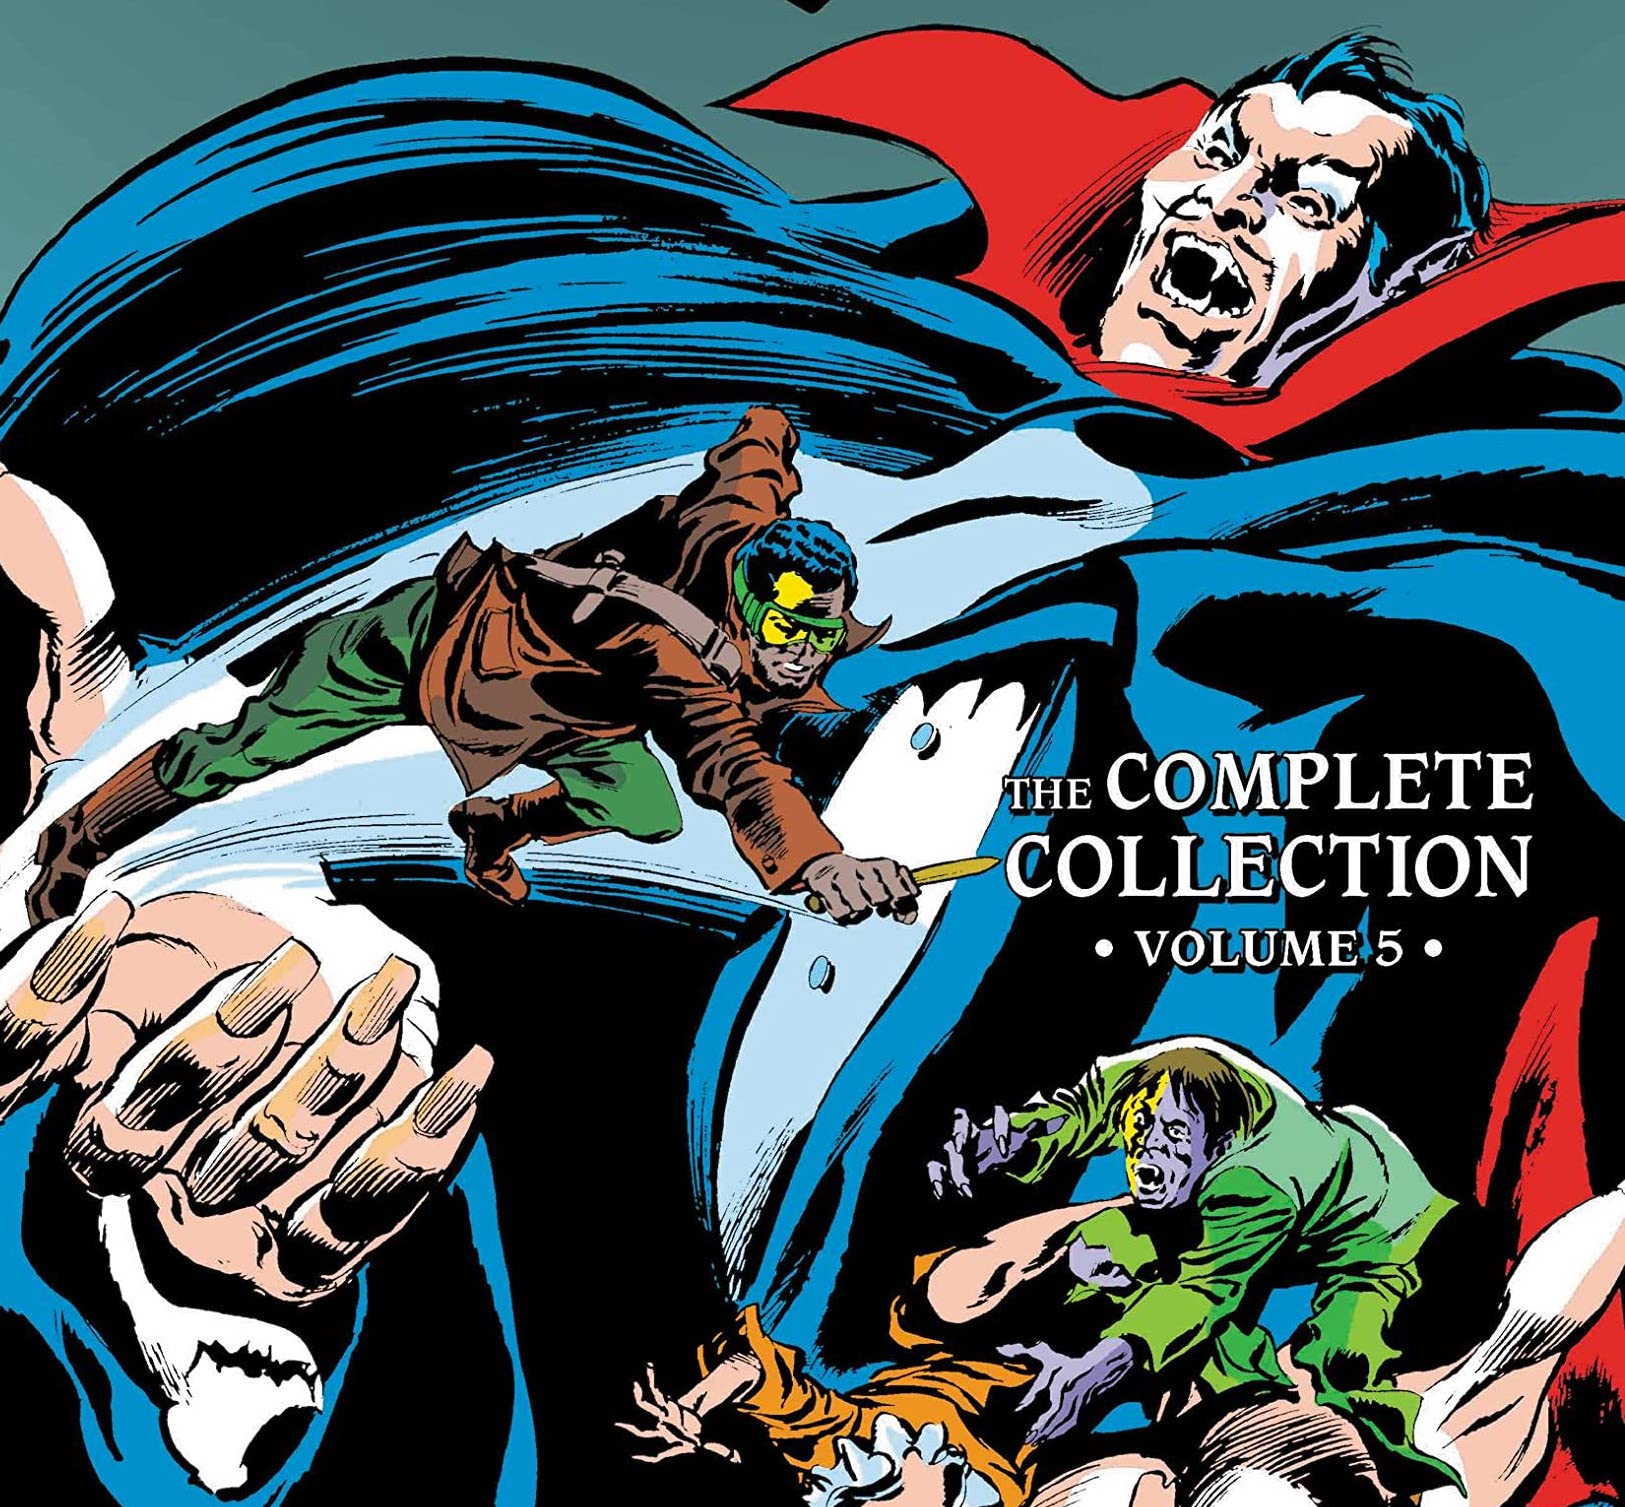 The Tomb of Dracula: The Complete Collection Vol. 5